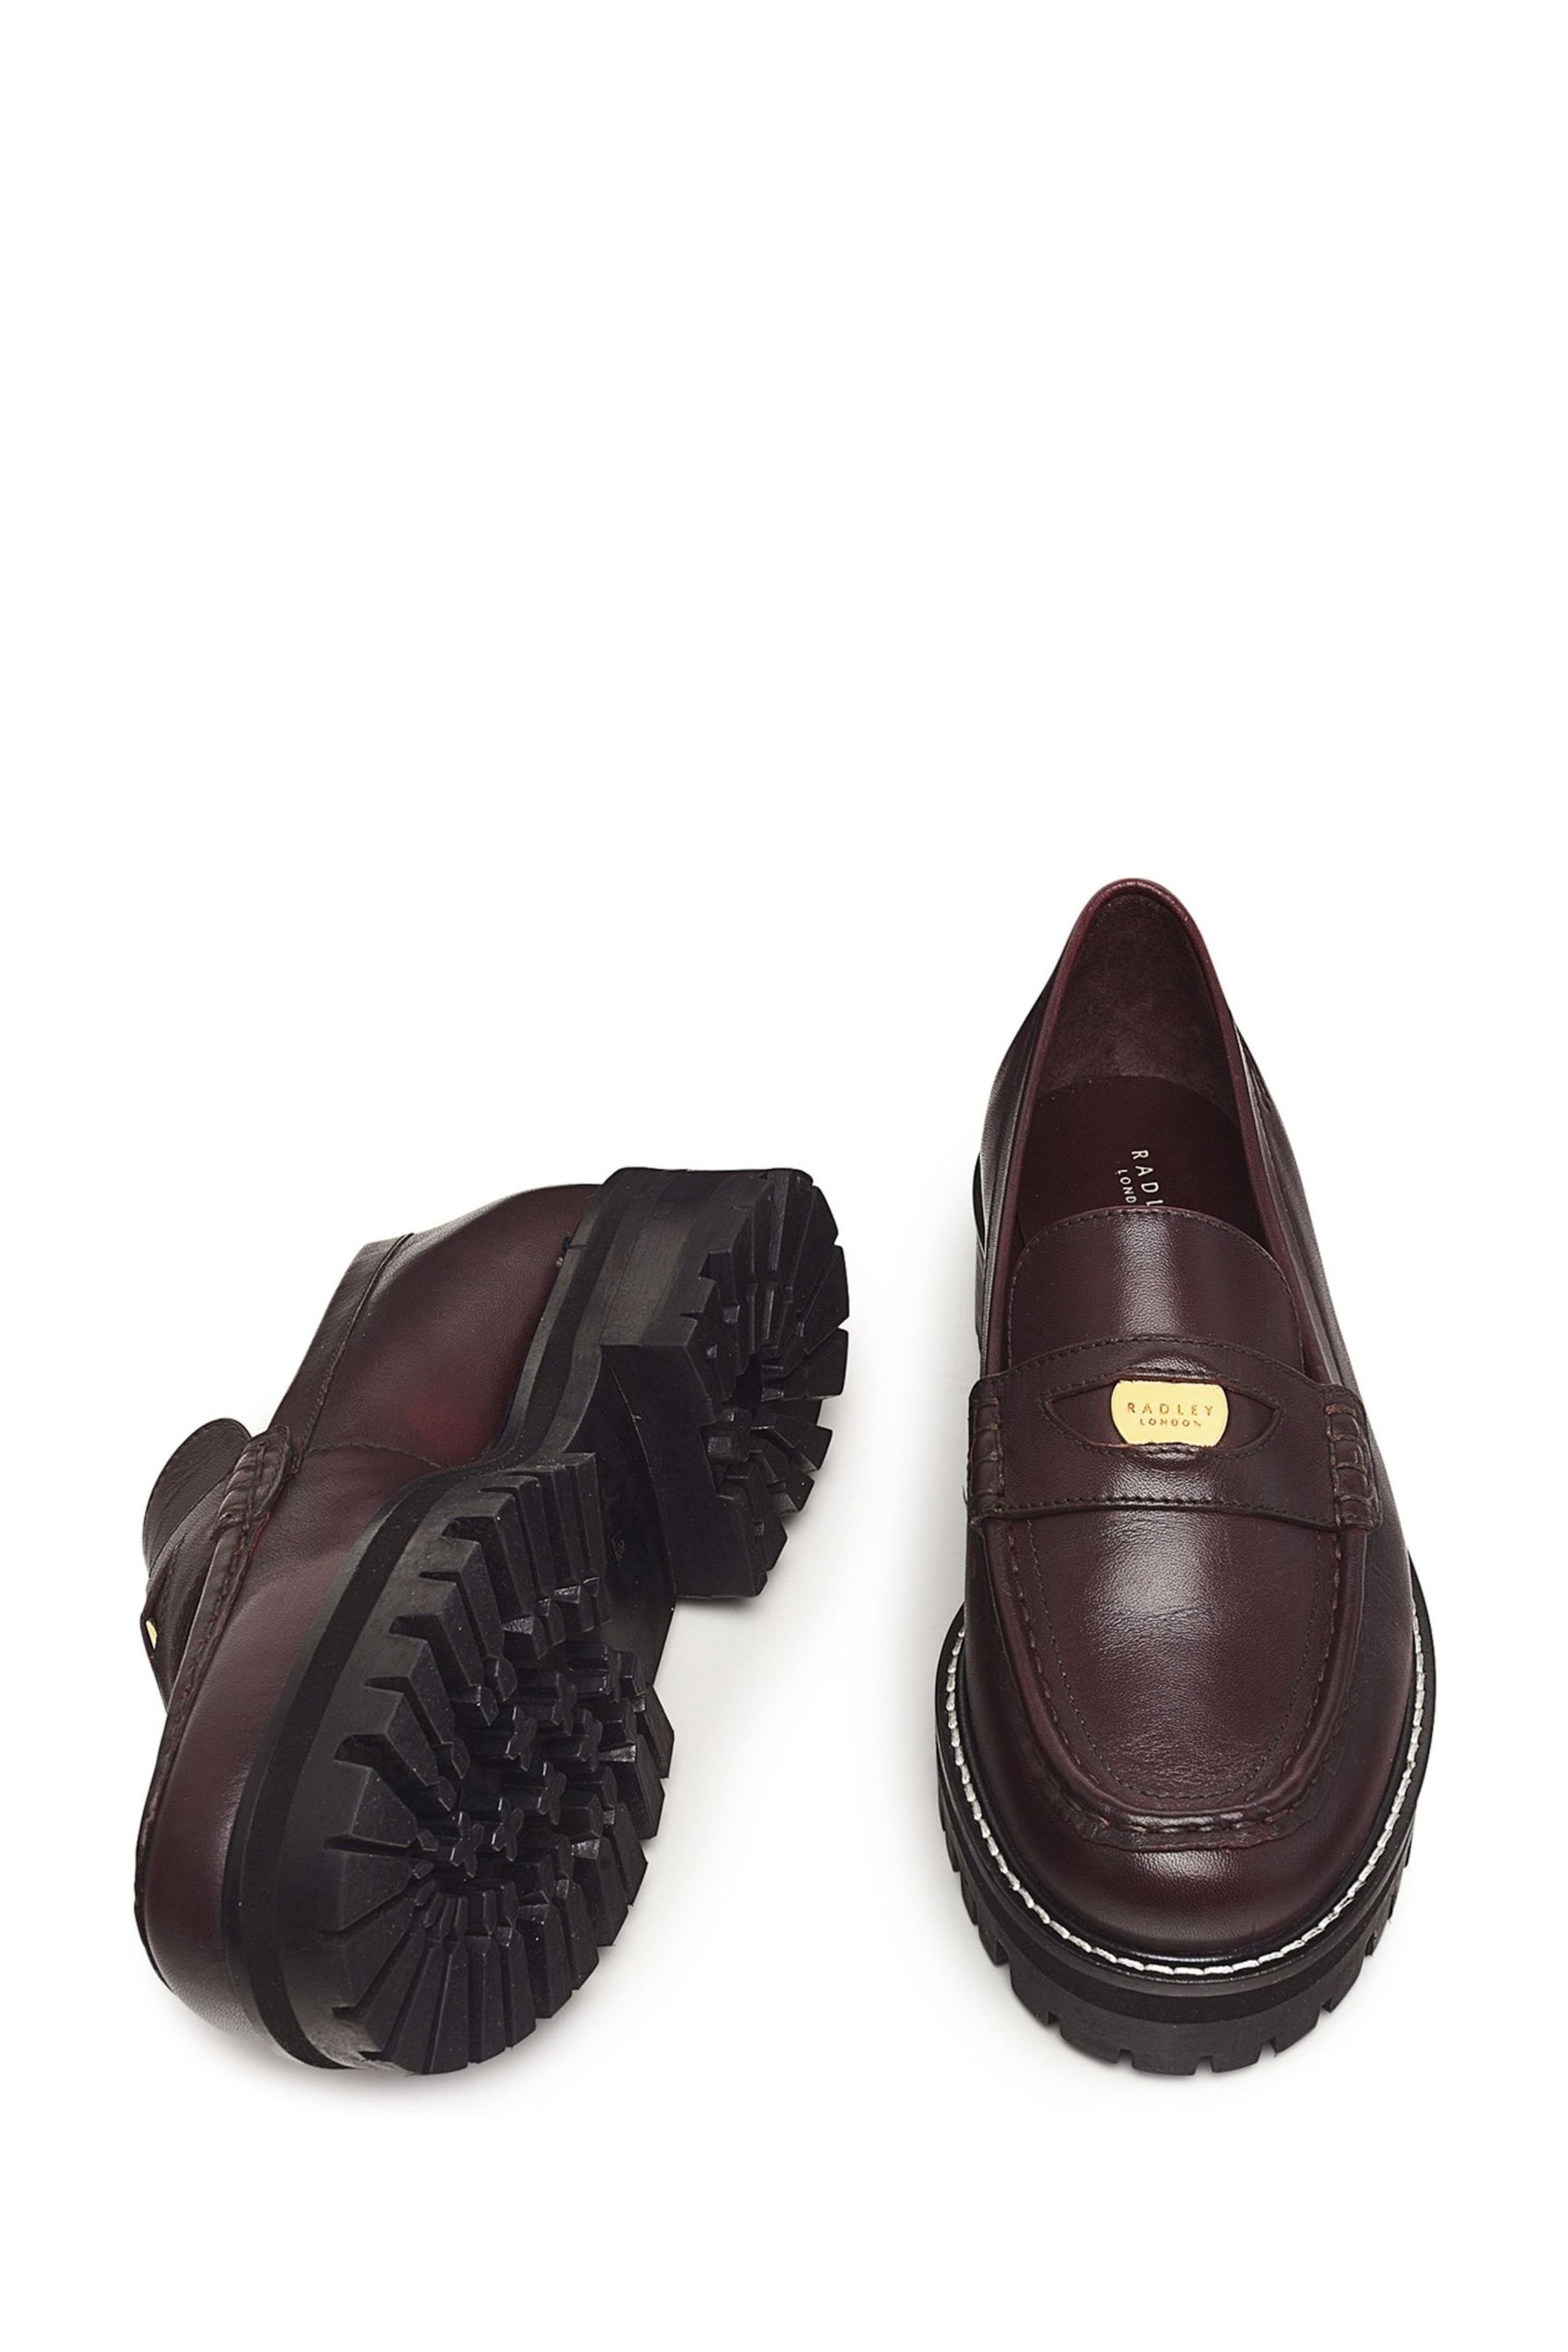 Radley London Red Thistle Grove Chunky Penny Loafers - Image 3 of 3